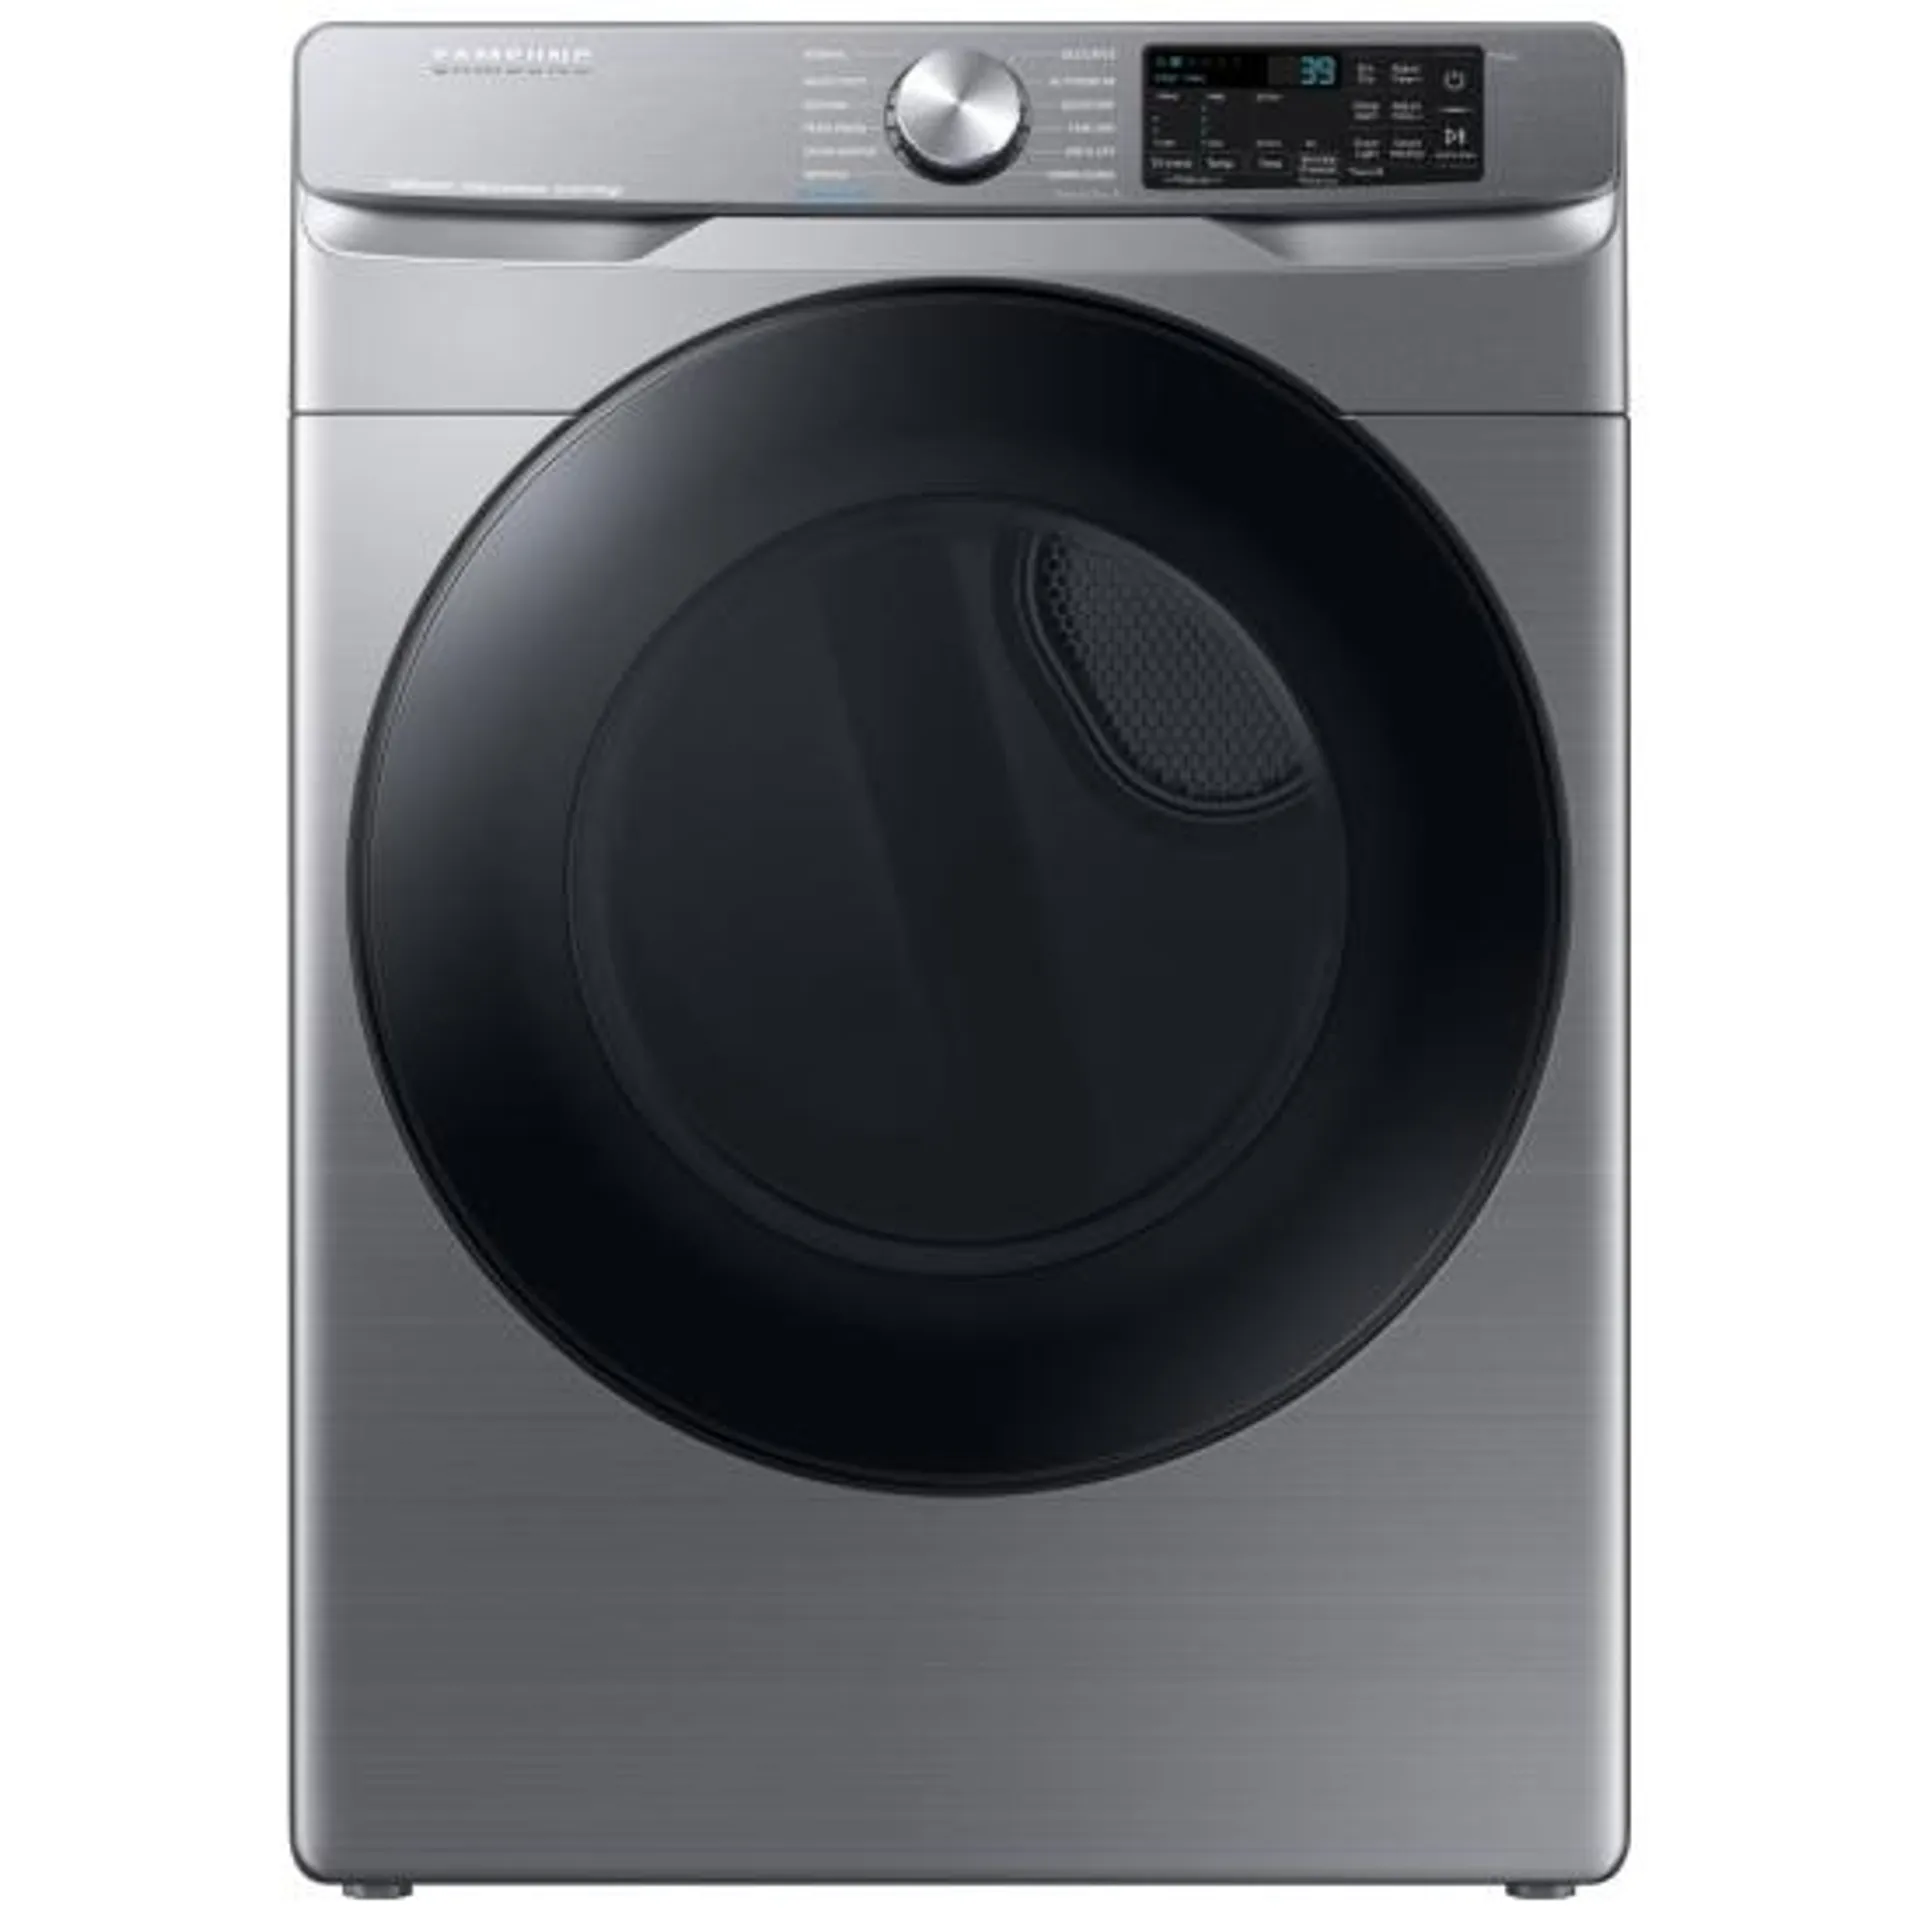 Samsung DVG45B6305P - DVG45B6305P/AC Dryer, 27 inch Width, Gas, 7.5 cu. ft. Capacity, Steam Clean, 5 Temperature Settings, Stackable, Steel Drum, Wifi Enabled, Grey colour